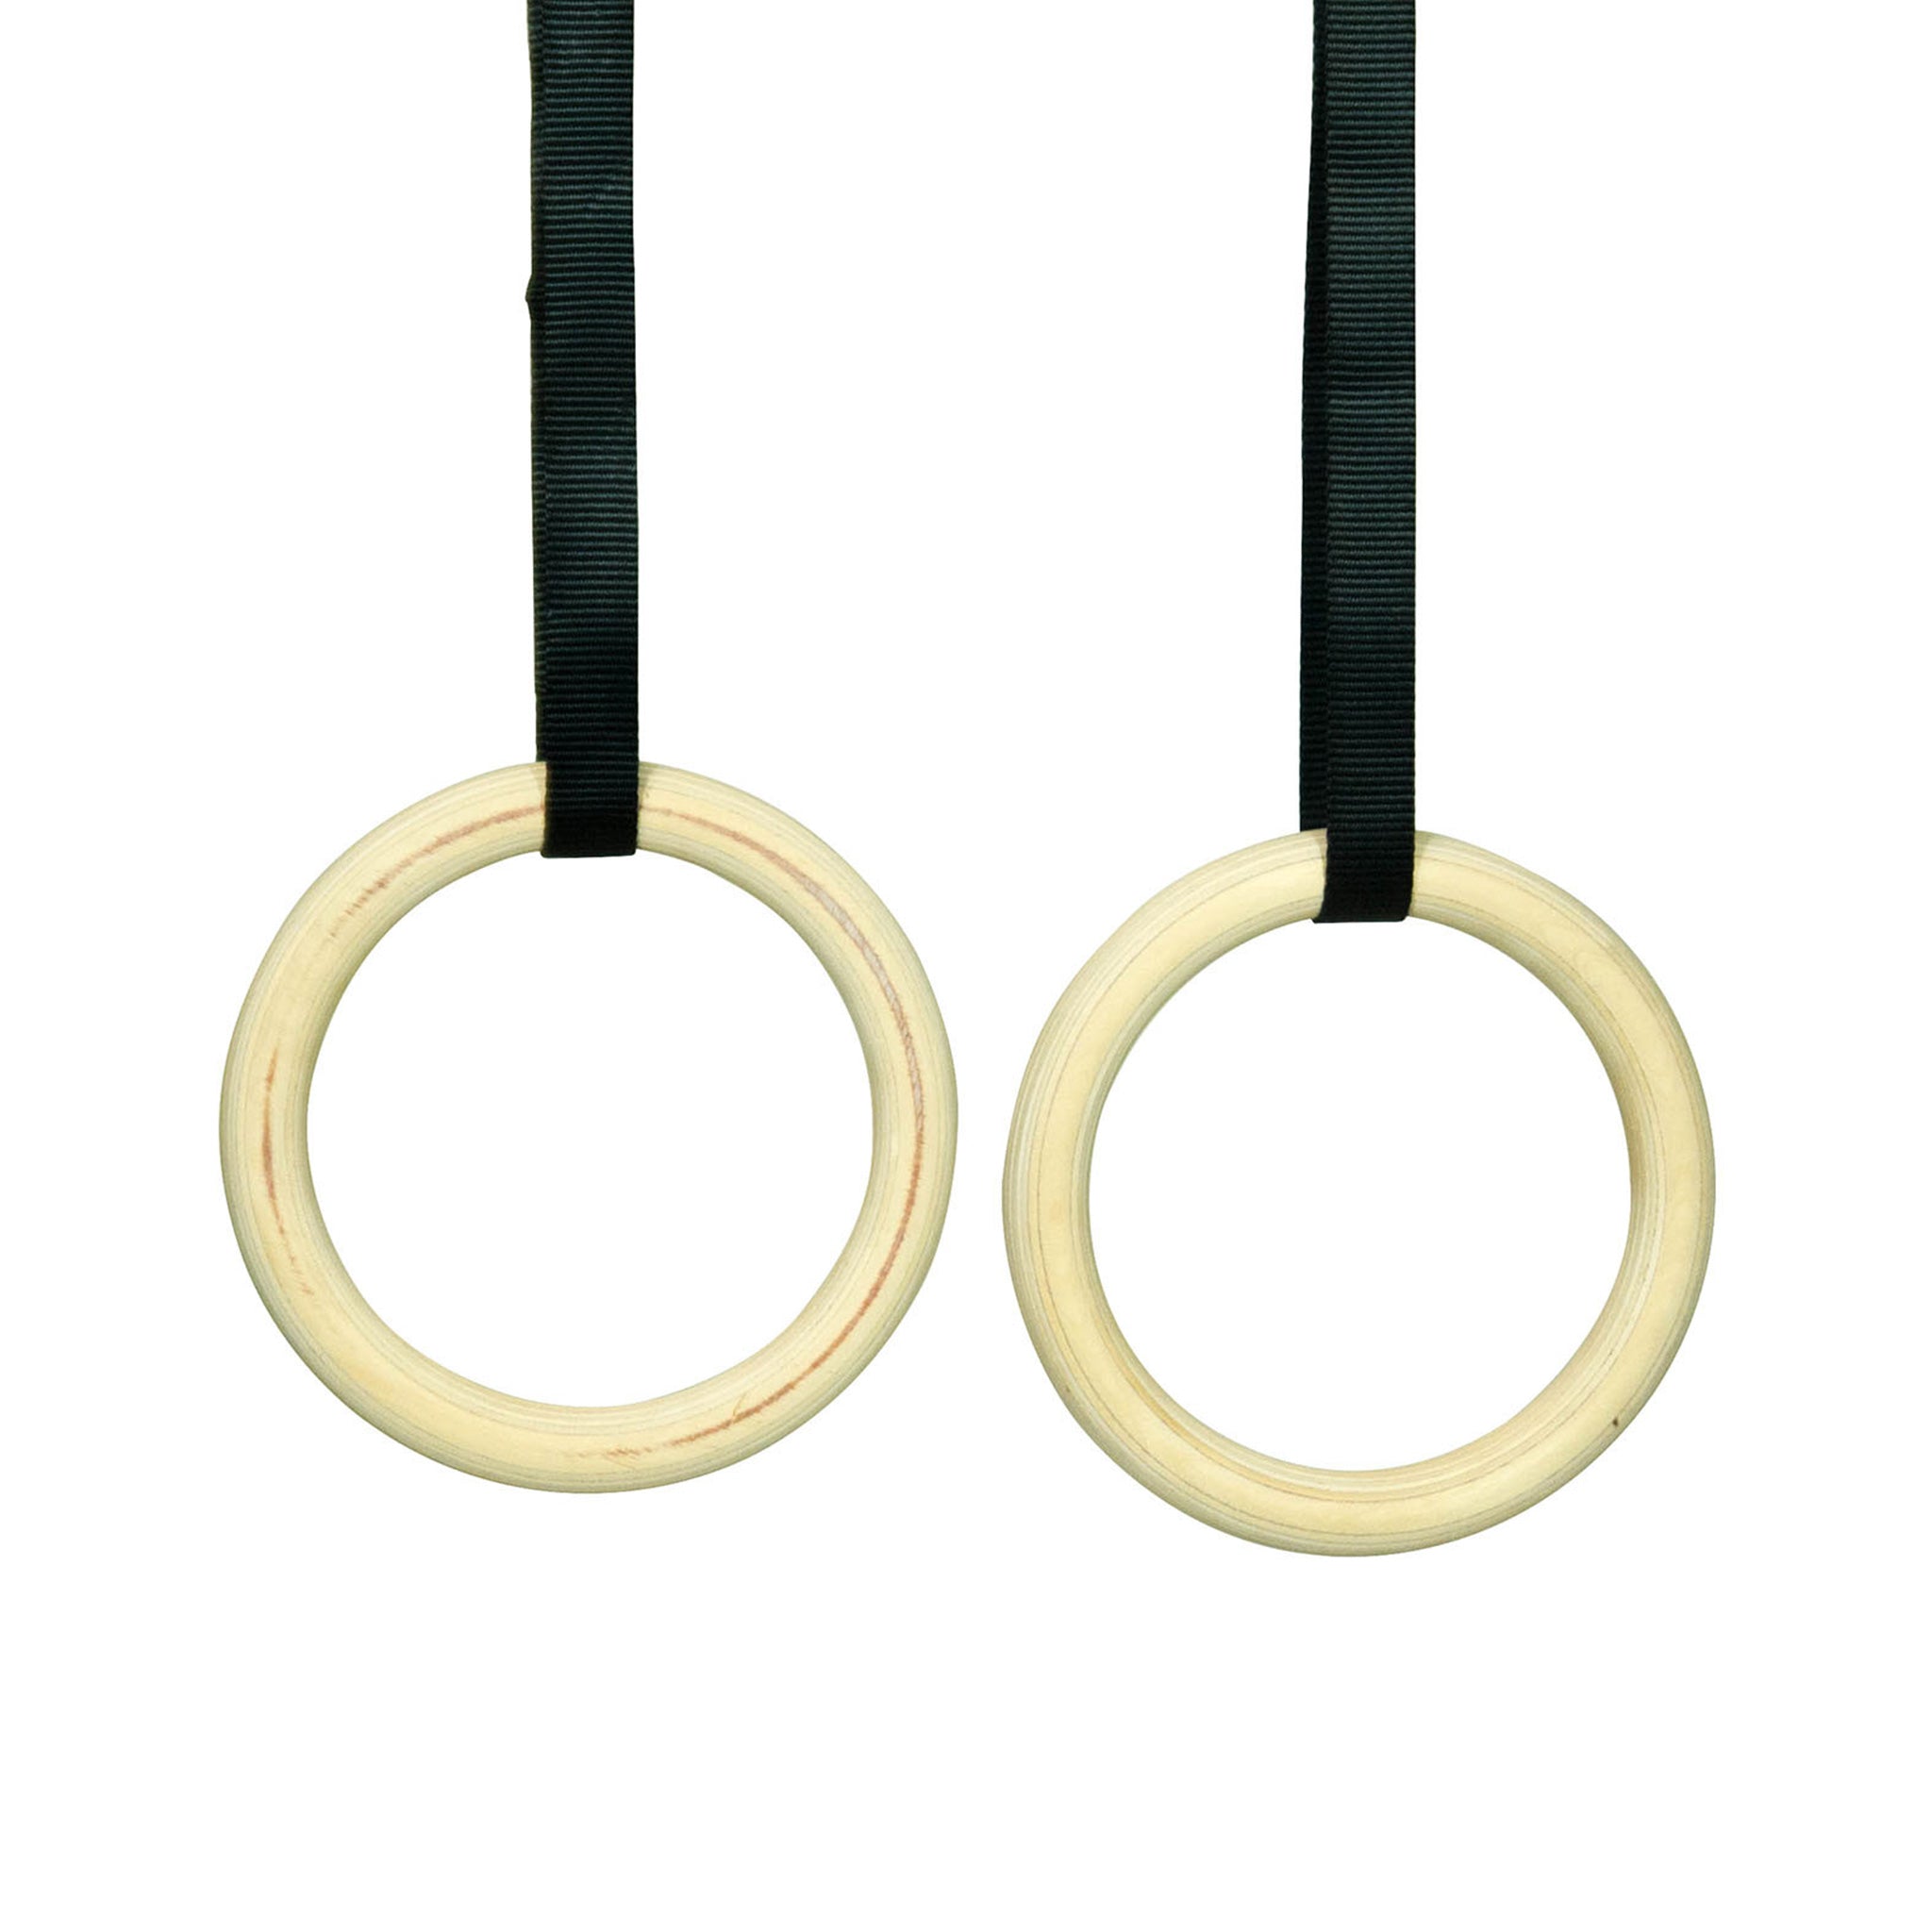 wooden olympic gymnastics rings